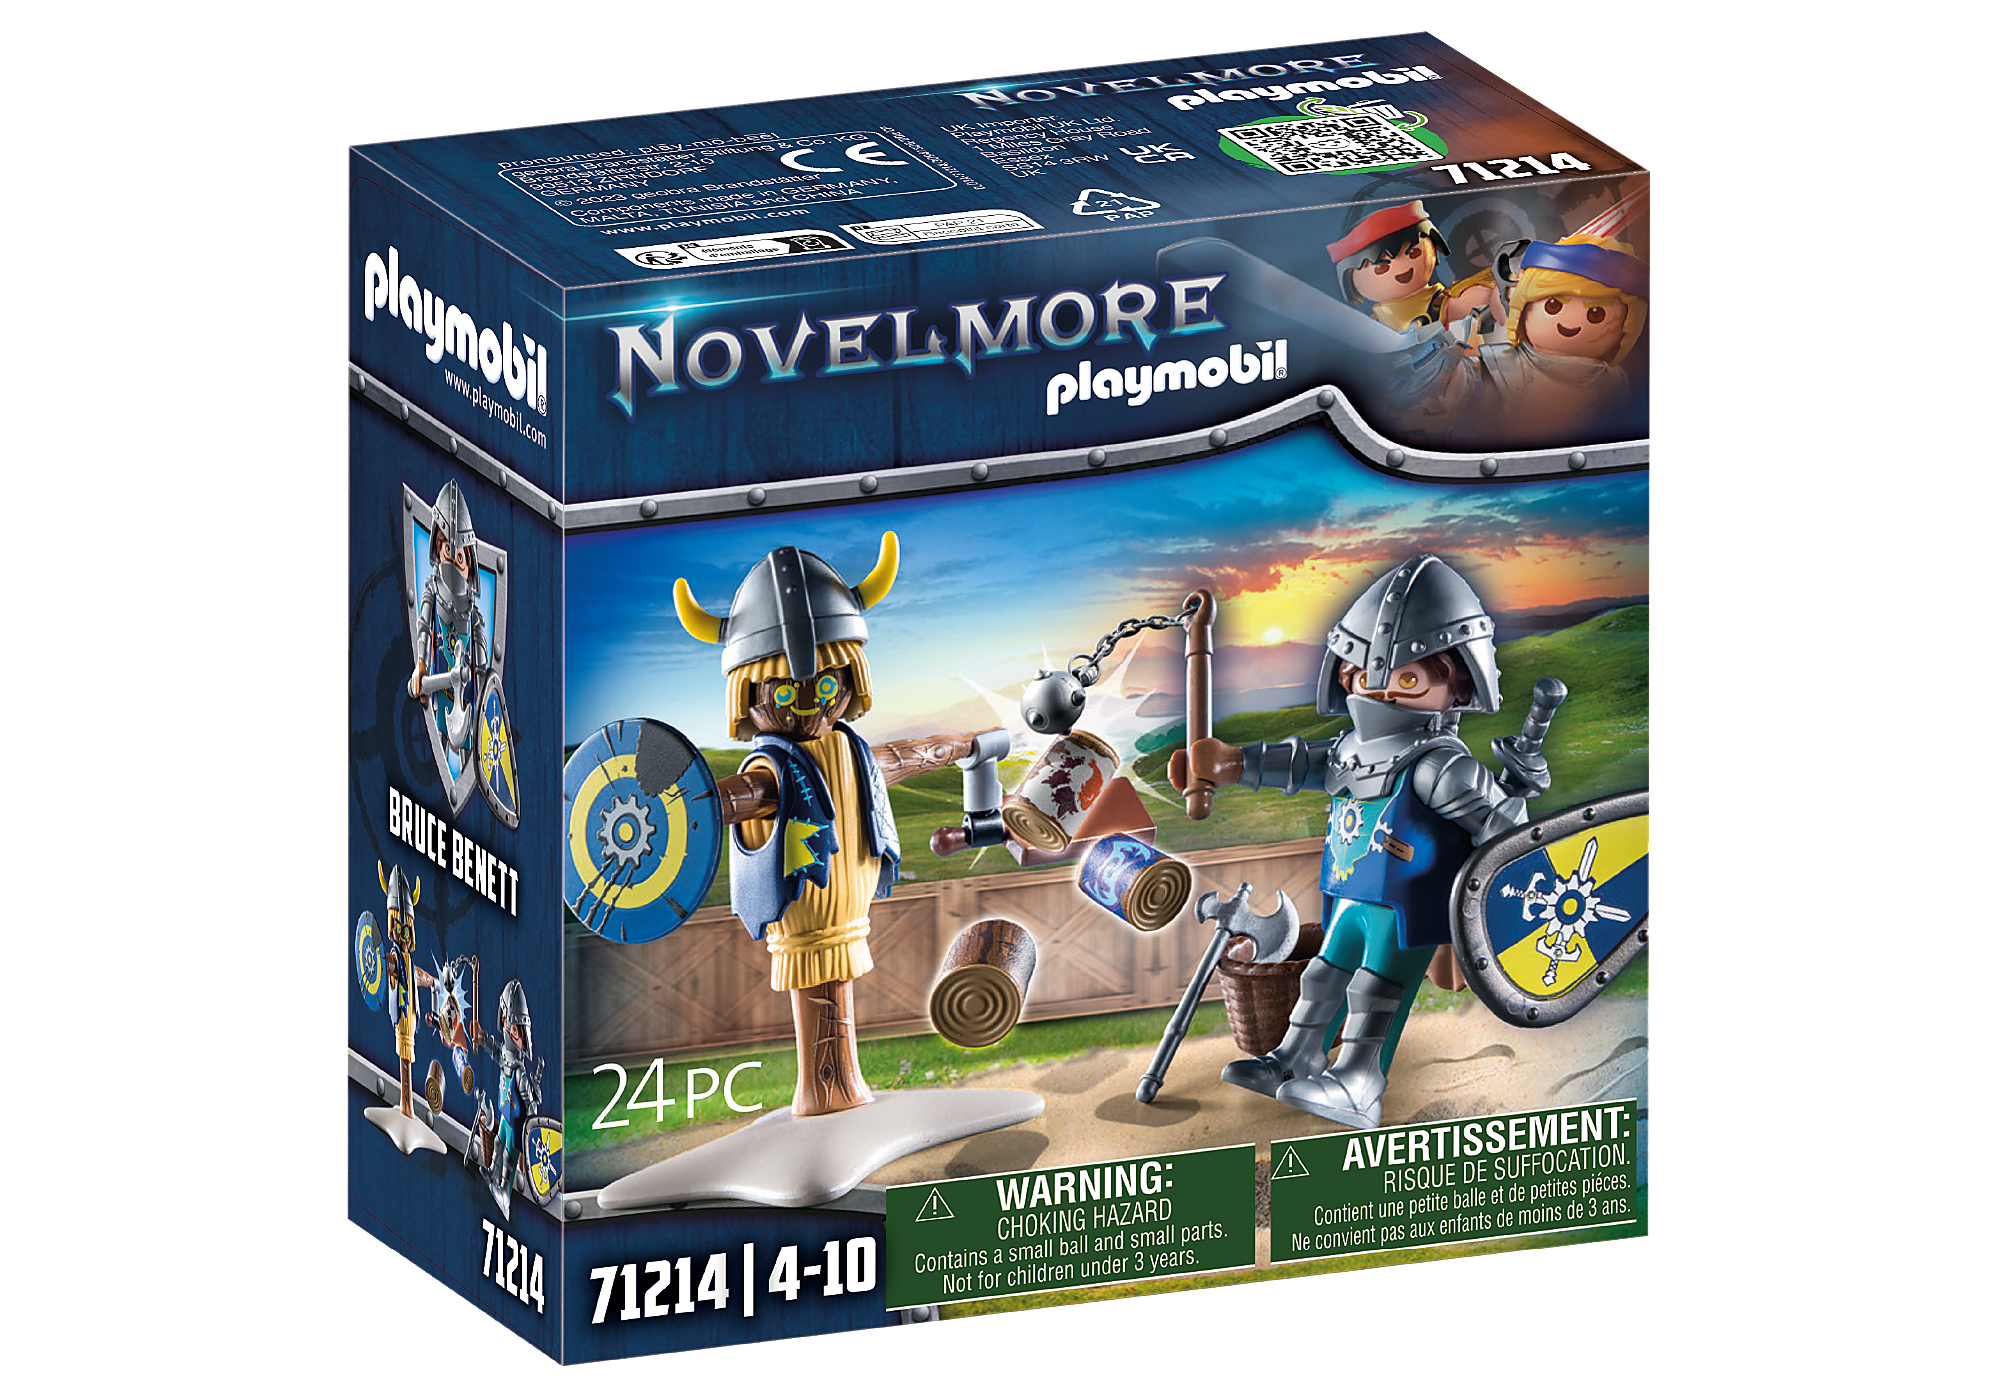 PLAYMOBIL POMPIERS: 9783986850029: unknown author: Books 